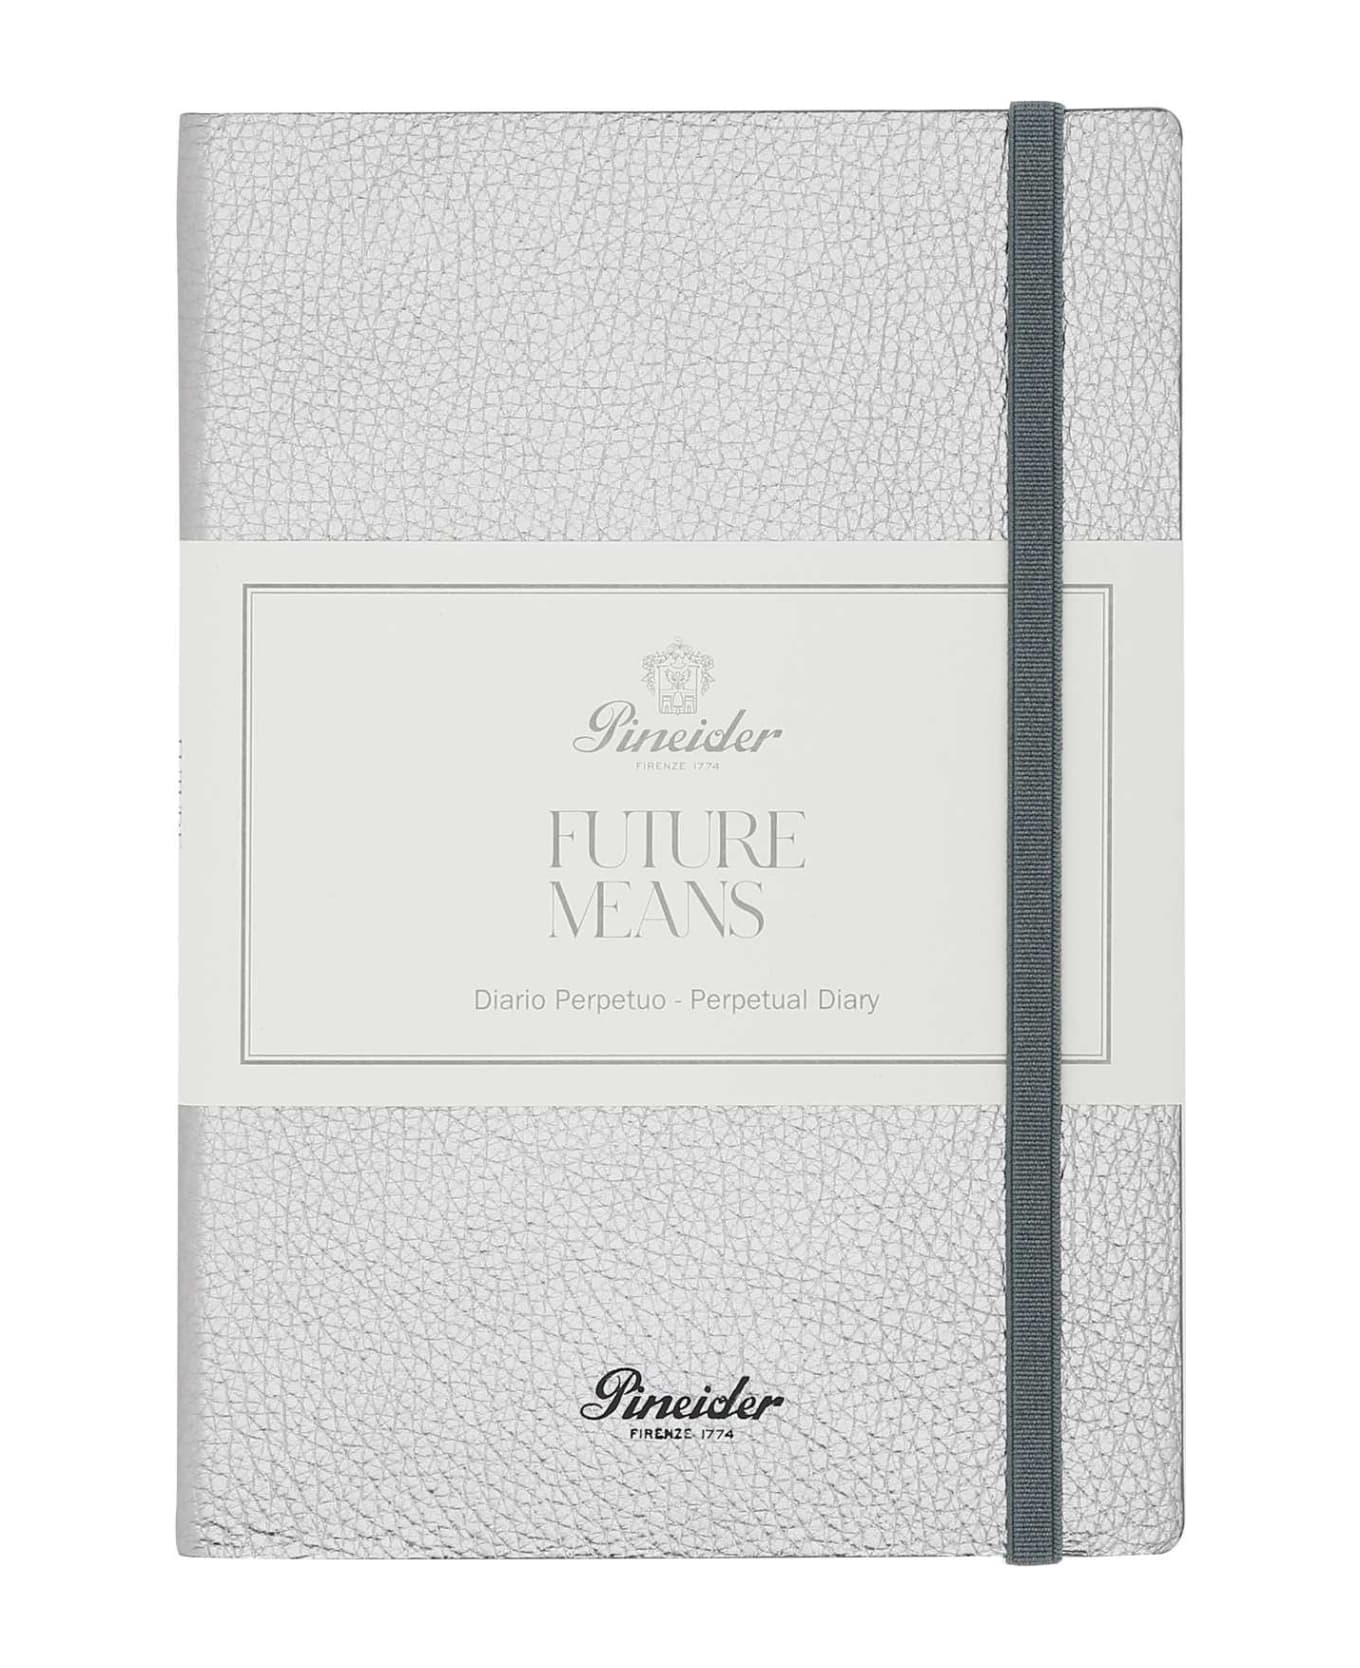 Pineider Silver Leather Future Means Diary - RUTHENIUM